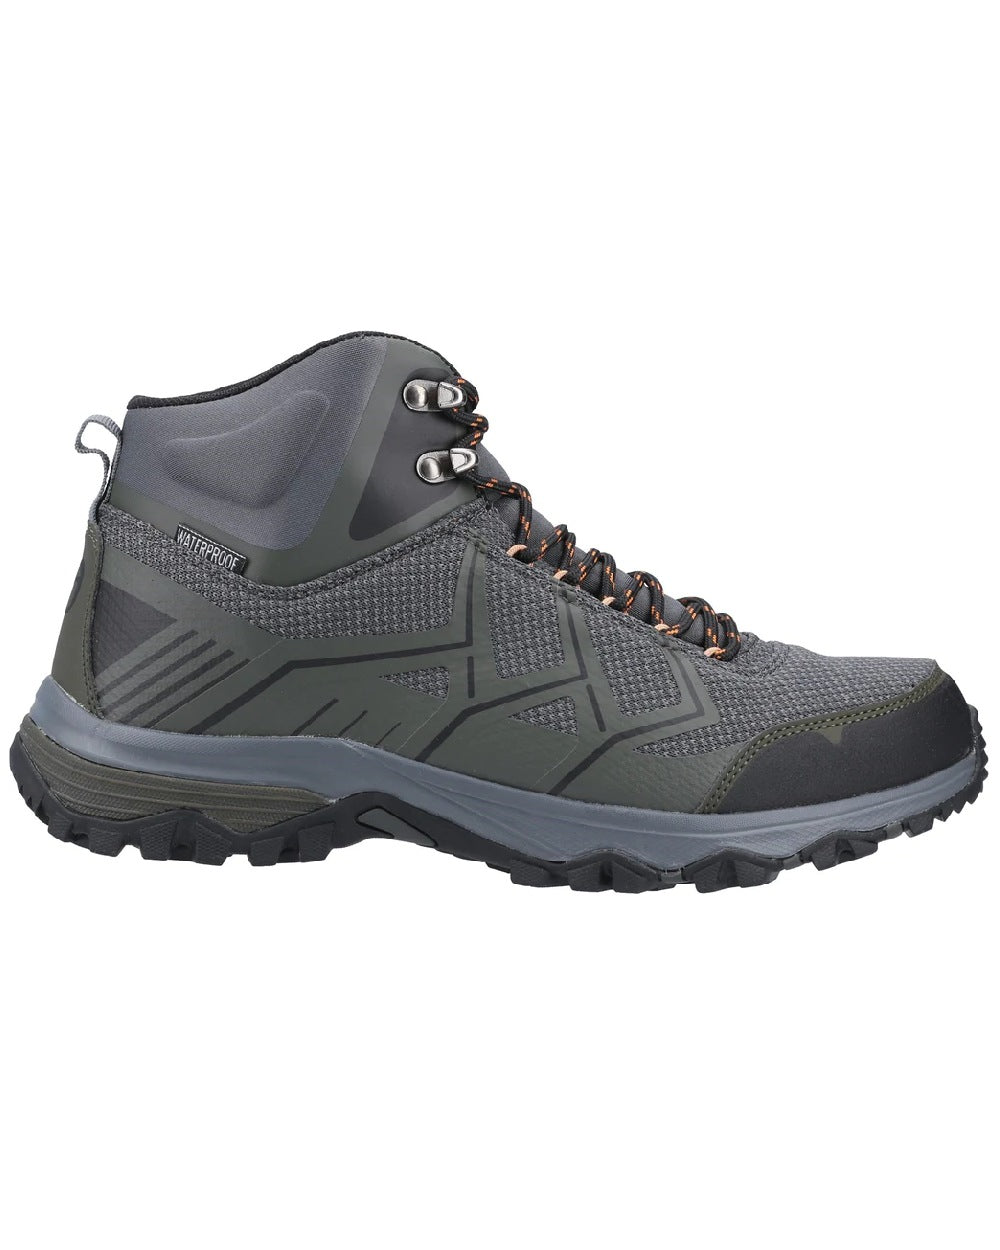 Cotswold Mens Wychwood Recycled Hiking Boots in Olive Grey 